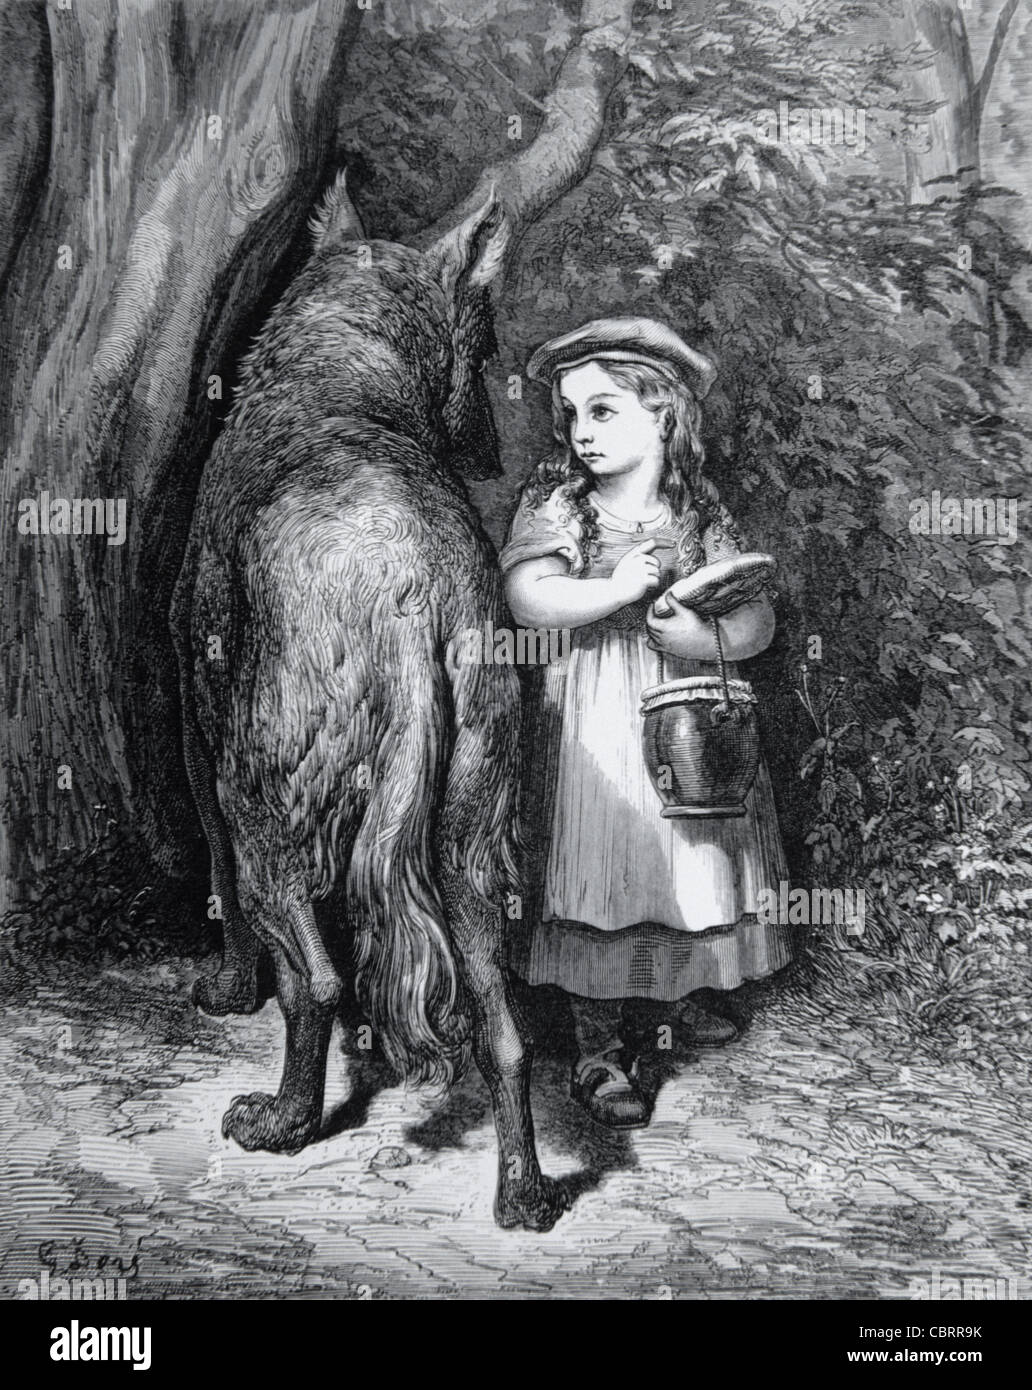 Little Red Riding Hood & the Big Bad Wolf Fairy Tale or Folk Story,  Engraving by Gustave Doré, 1862 Stock Photo - Alamy